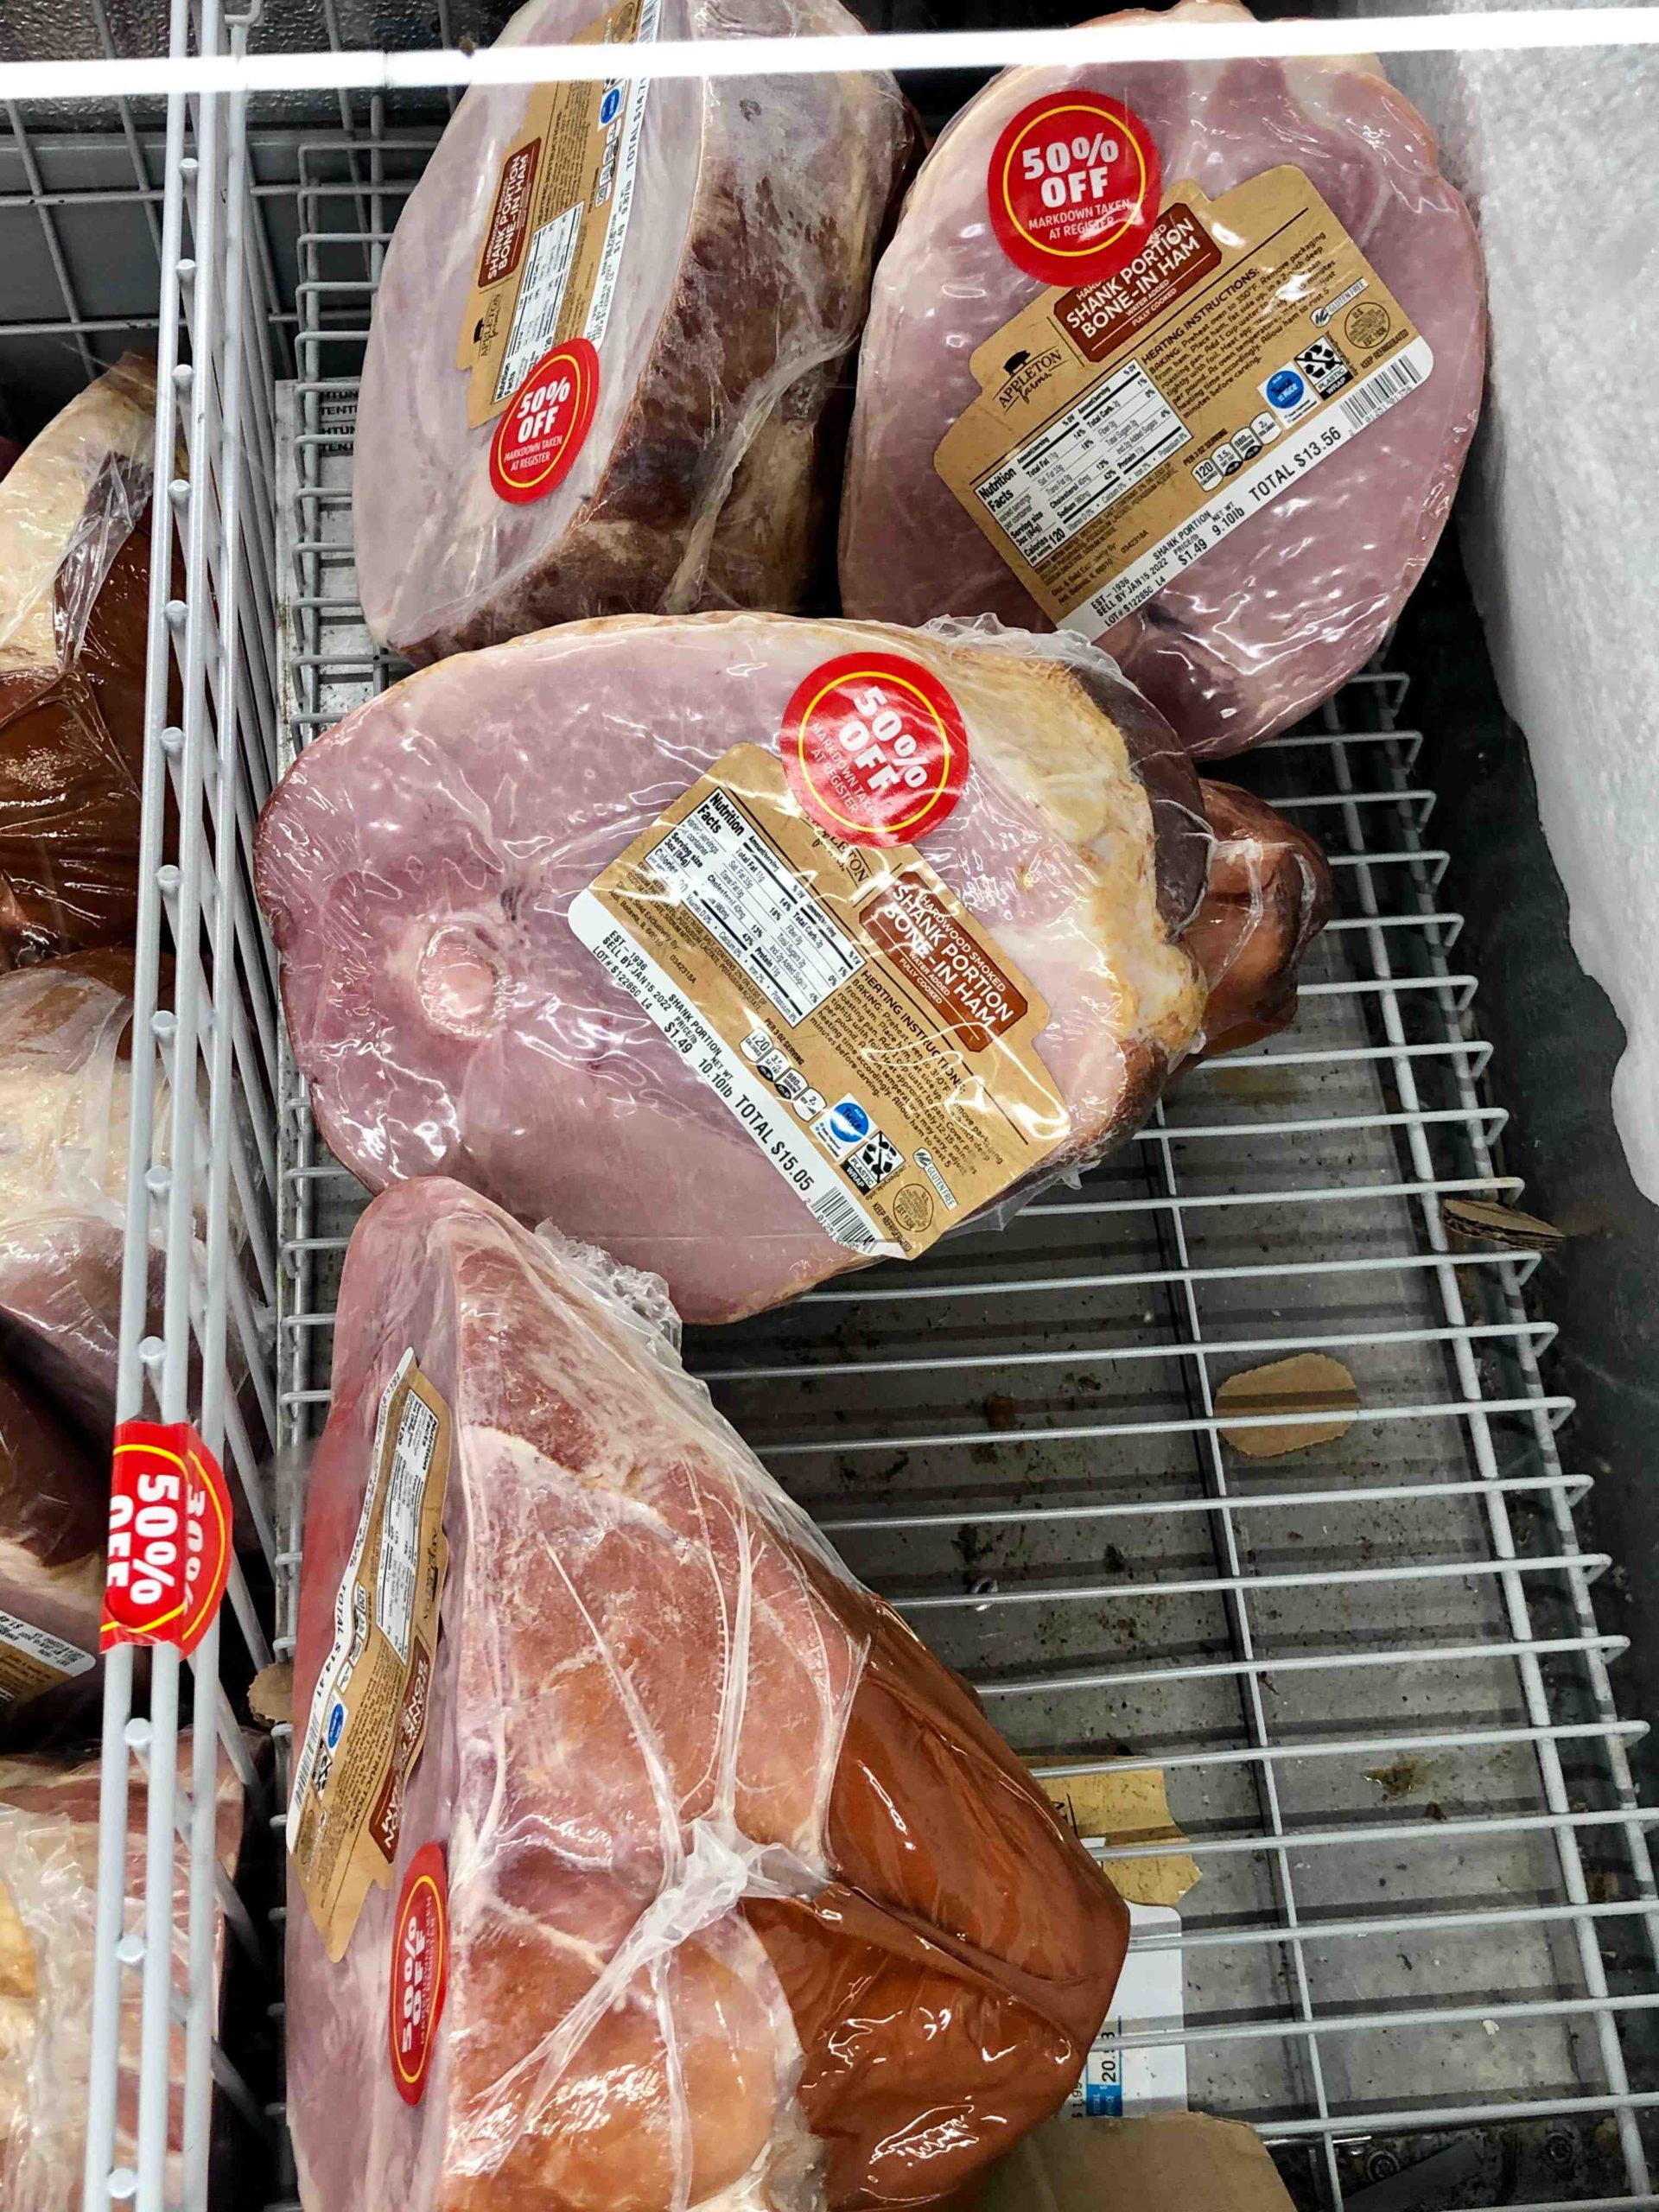 What's the difference between spiral ham and regular ham?